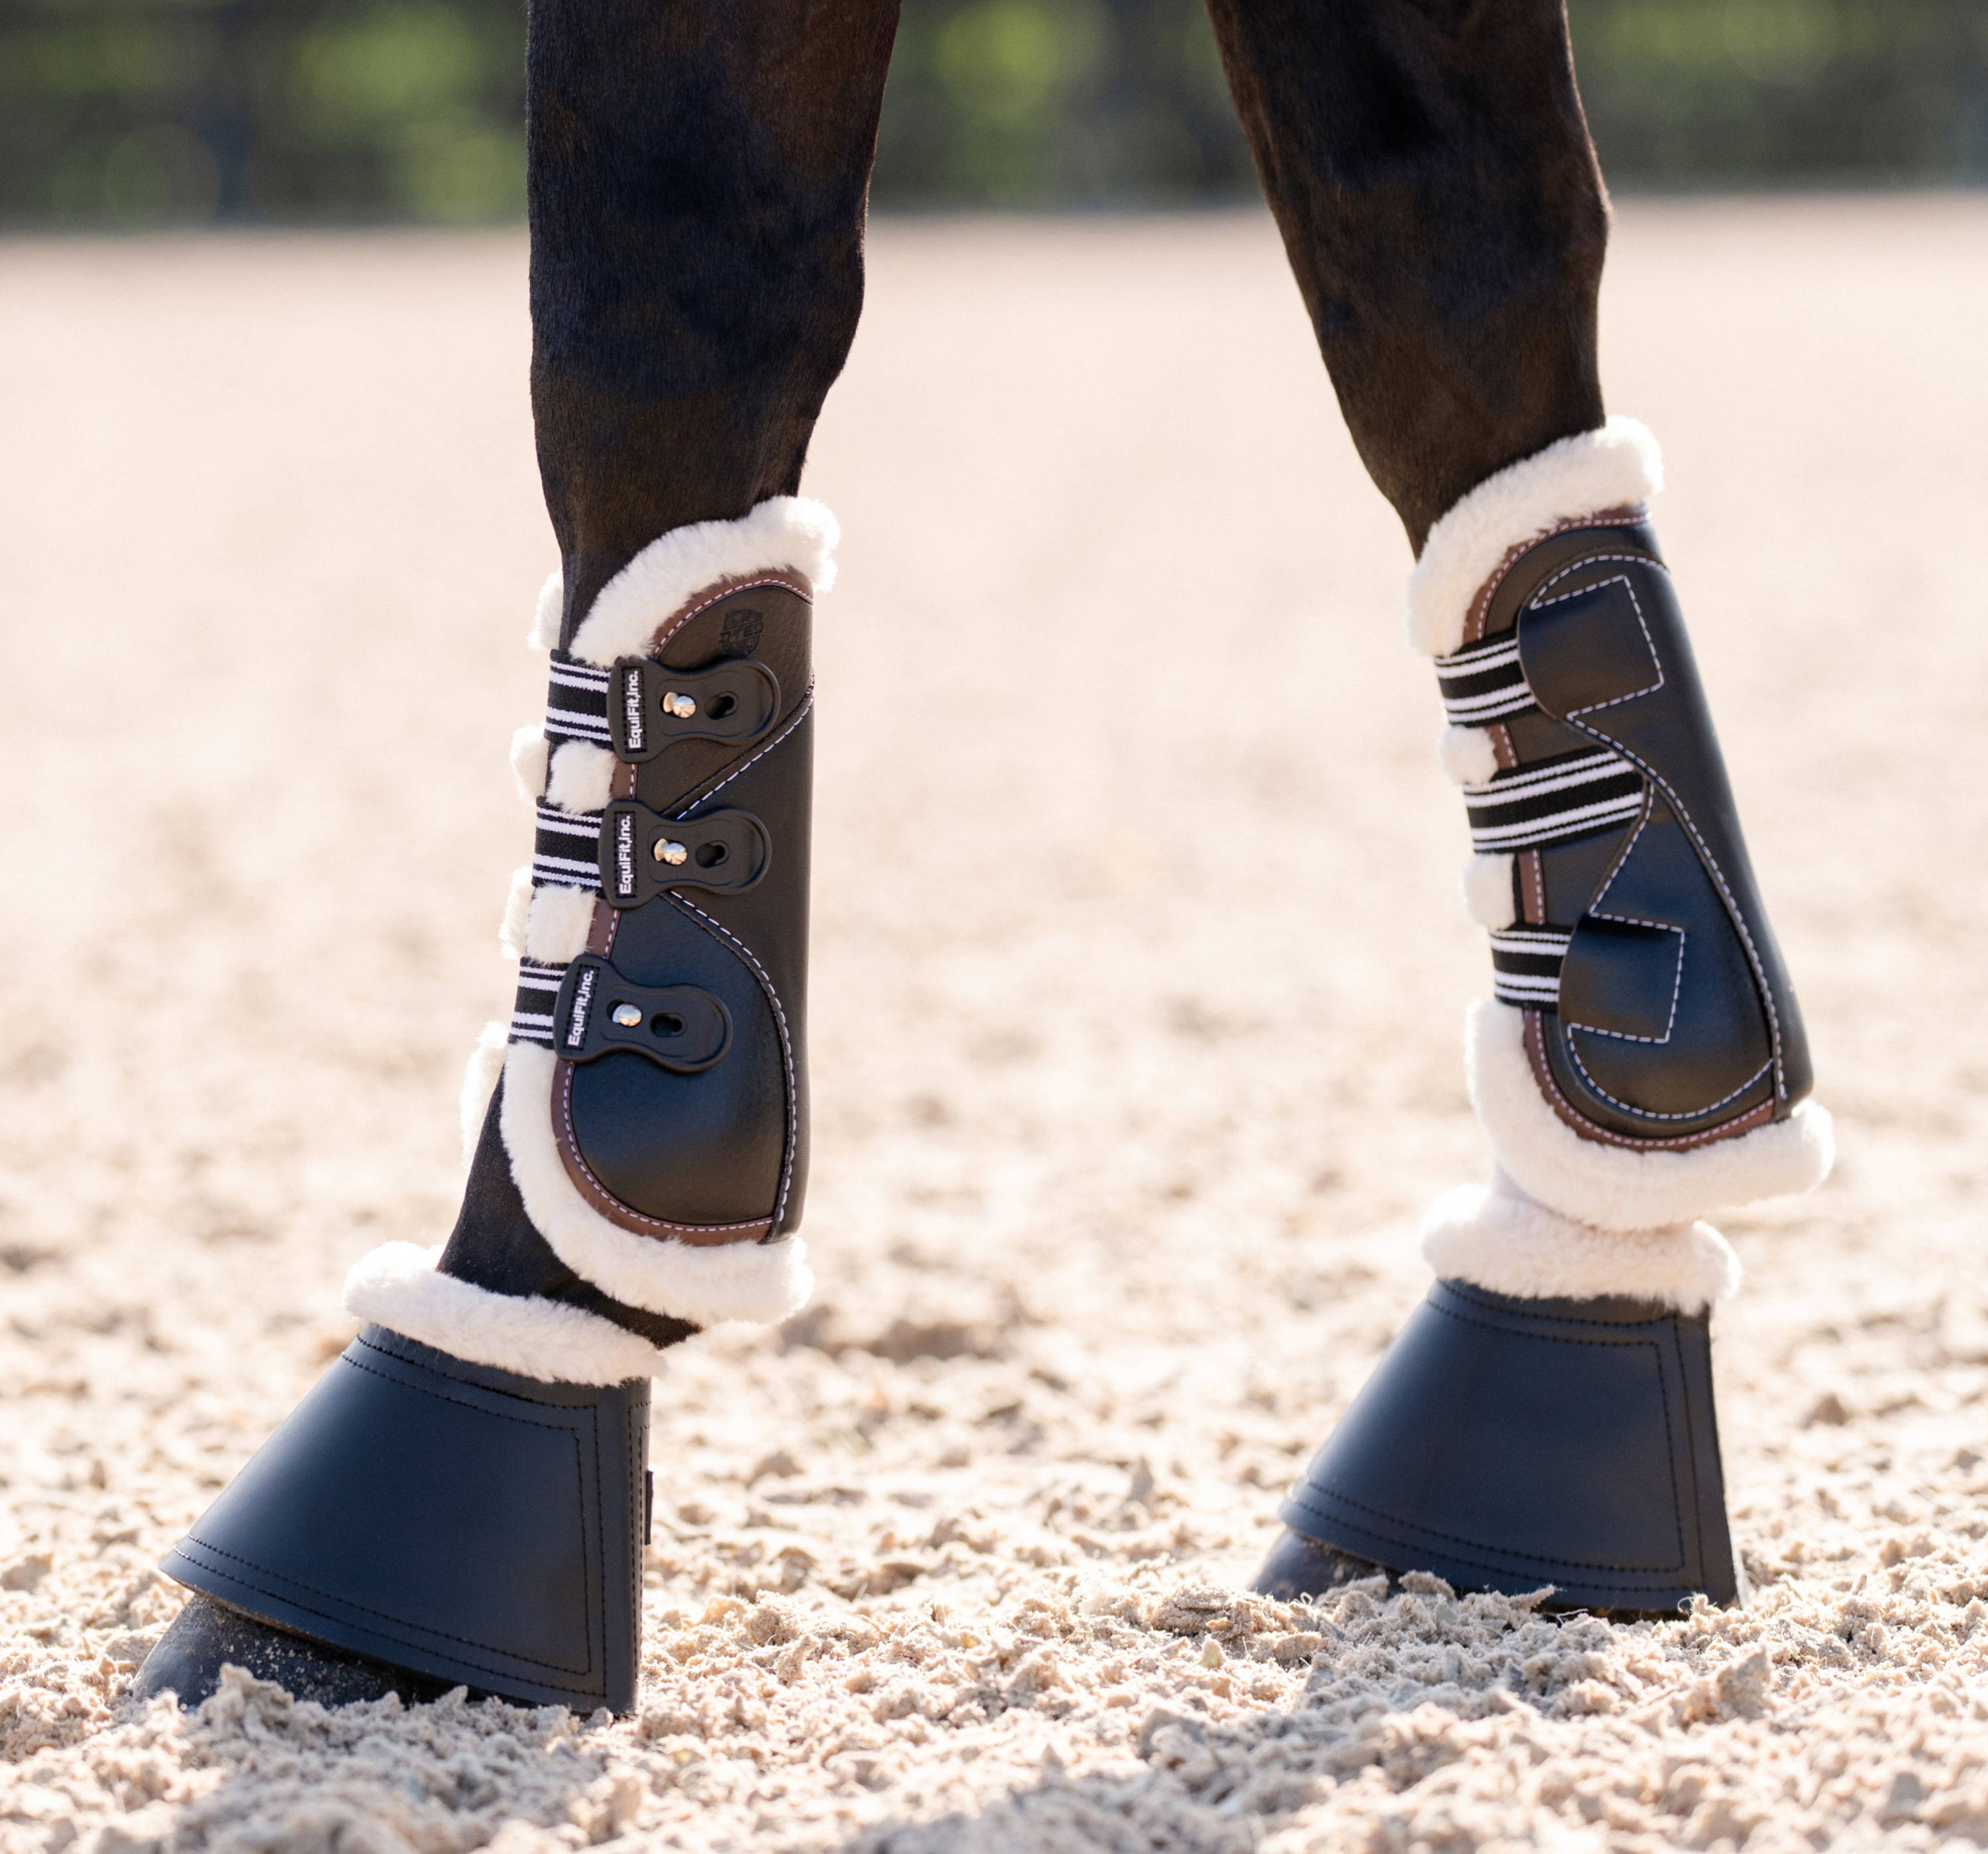 D-TEQS WITH ULTRAWOOL LINERS AND BELL BOOTS WITH SHEEPSWOOL ON A HORSE